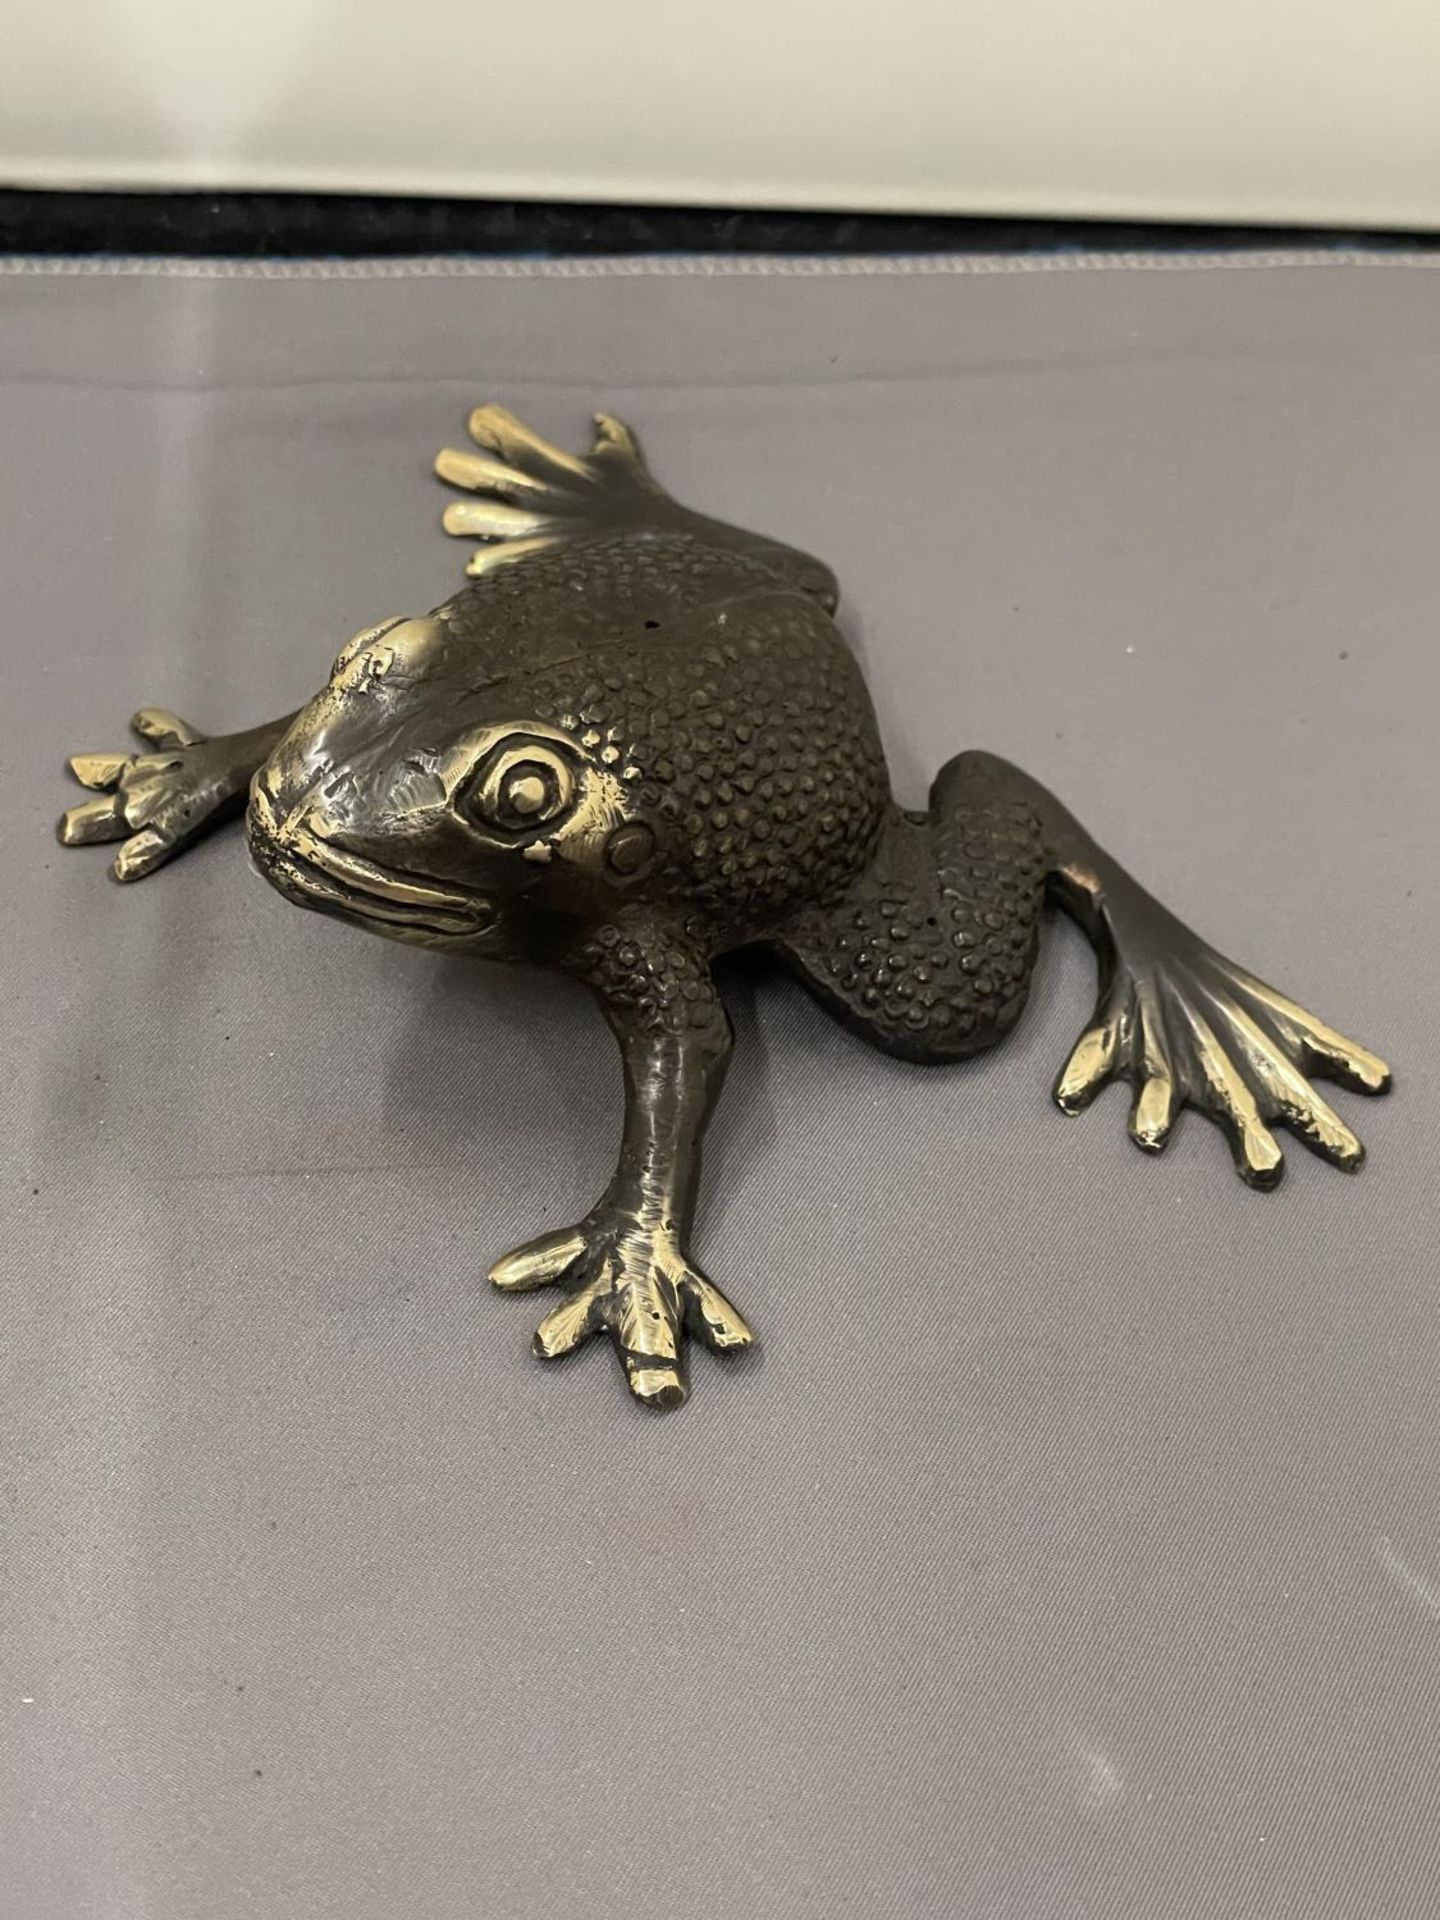 A BRONZE FIGURE OF A FROG - Image 2 of 6